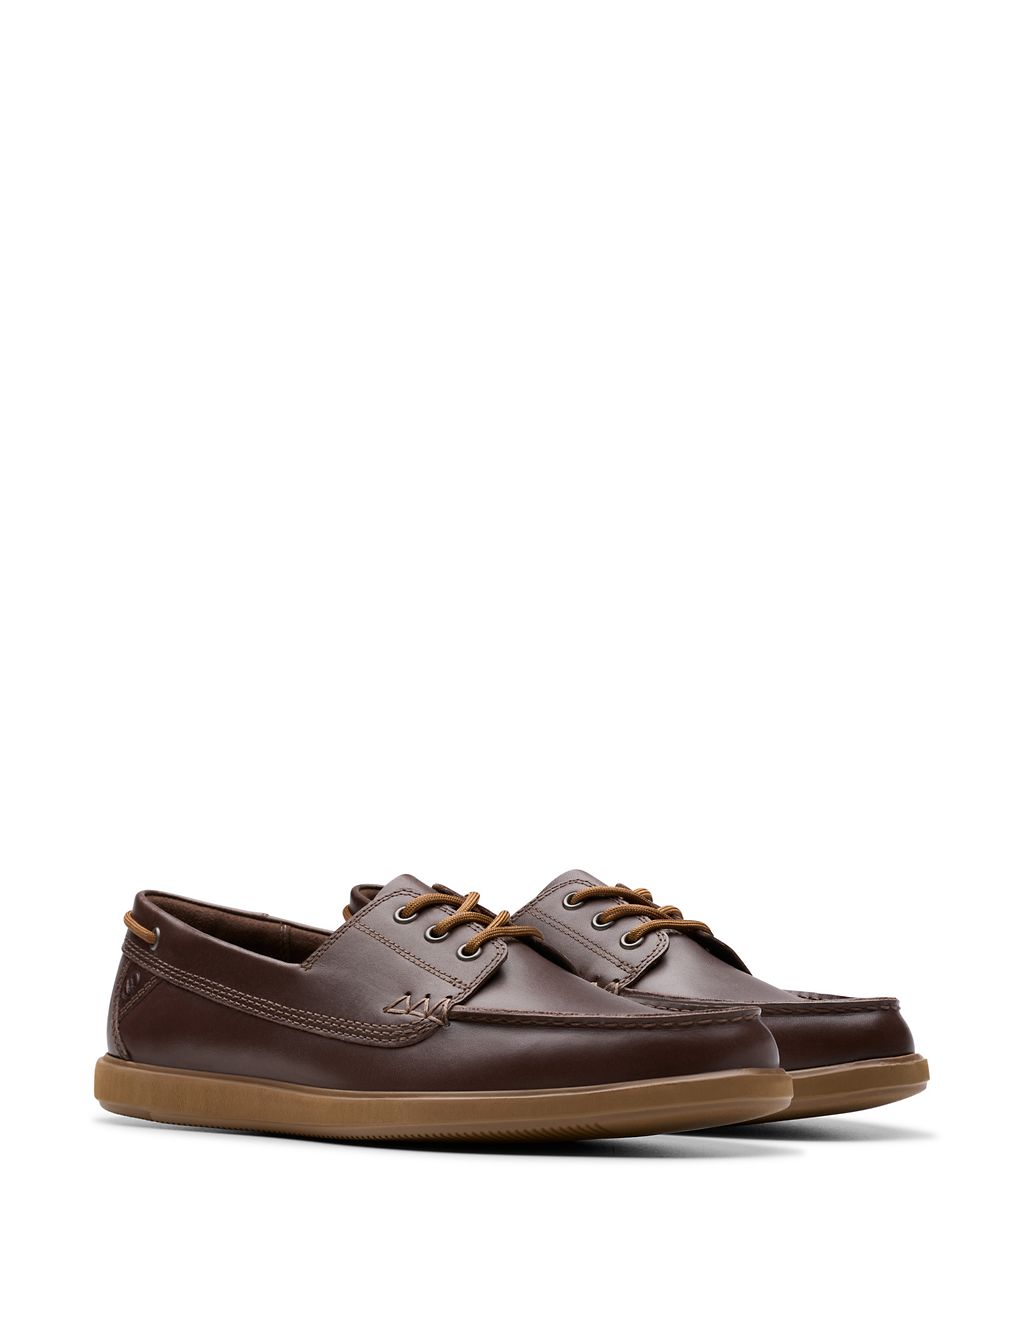 Leather Flat Boat Shoes 4 of 6